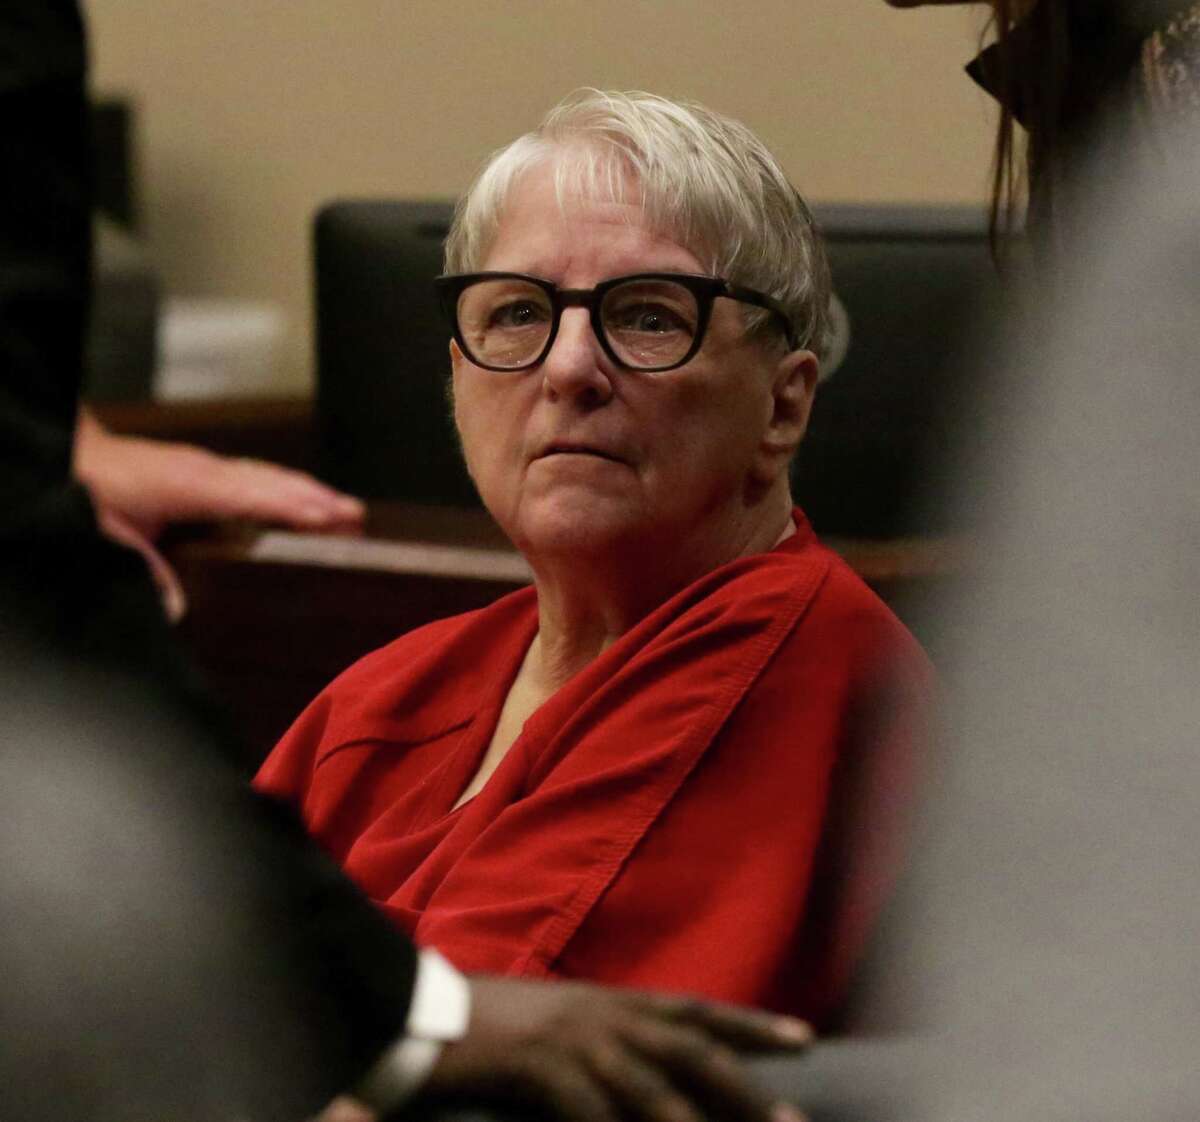 Convicted baby killer Genene Jones appears in court Wednesday morning at a hearing for a speedy trial. Jones was indicted last year, accused in the deaths of five Bexar County babies during the same period in the 1980s when she was convicted of killing Chelsea McClellan with an overdose of muscle relaxers. Her trial is set for July, but attorneys are seeking to try her earlier, and likely before Bexar County District Attorney Nico LaHood leaves office. The hearing was held in the 399th state District Court, presided by Judge Frank Castro 1st Floor, Cadena-Reeves Justice Center on Wednesday, April 18, 2018.